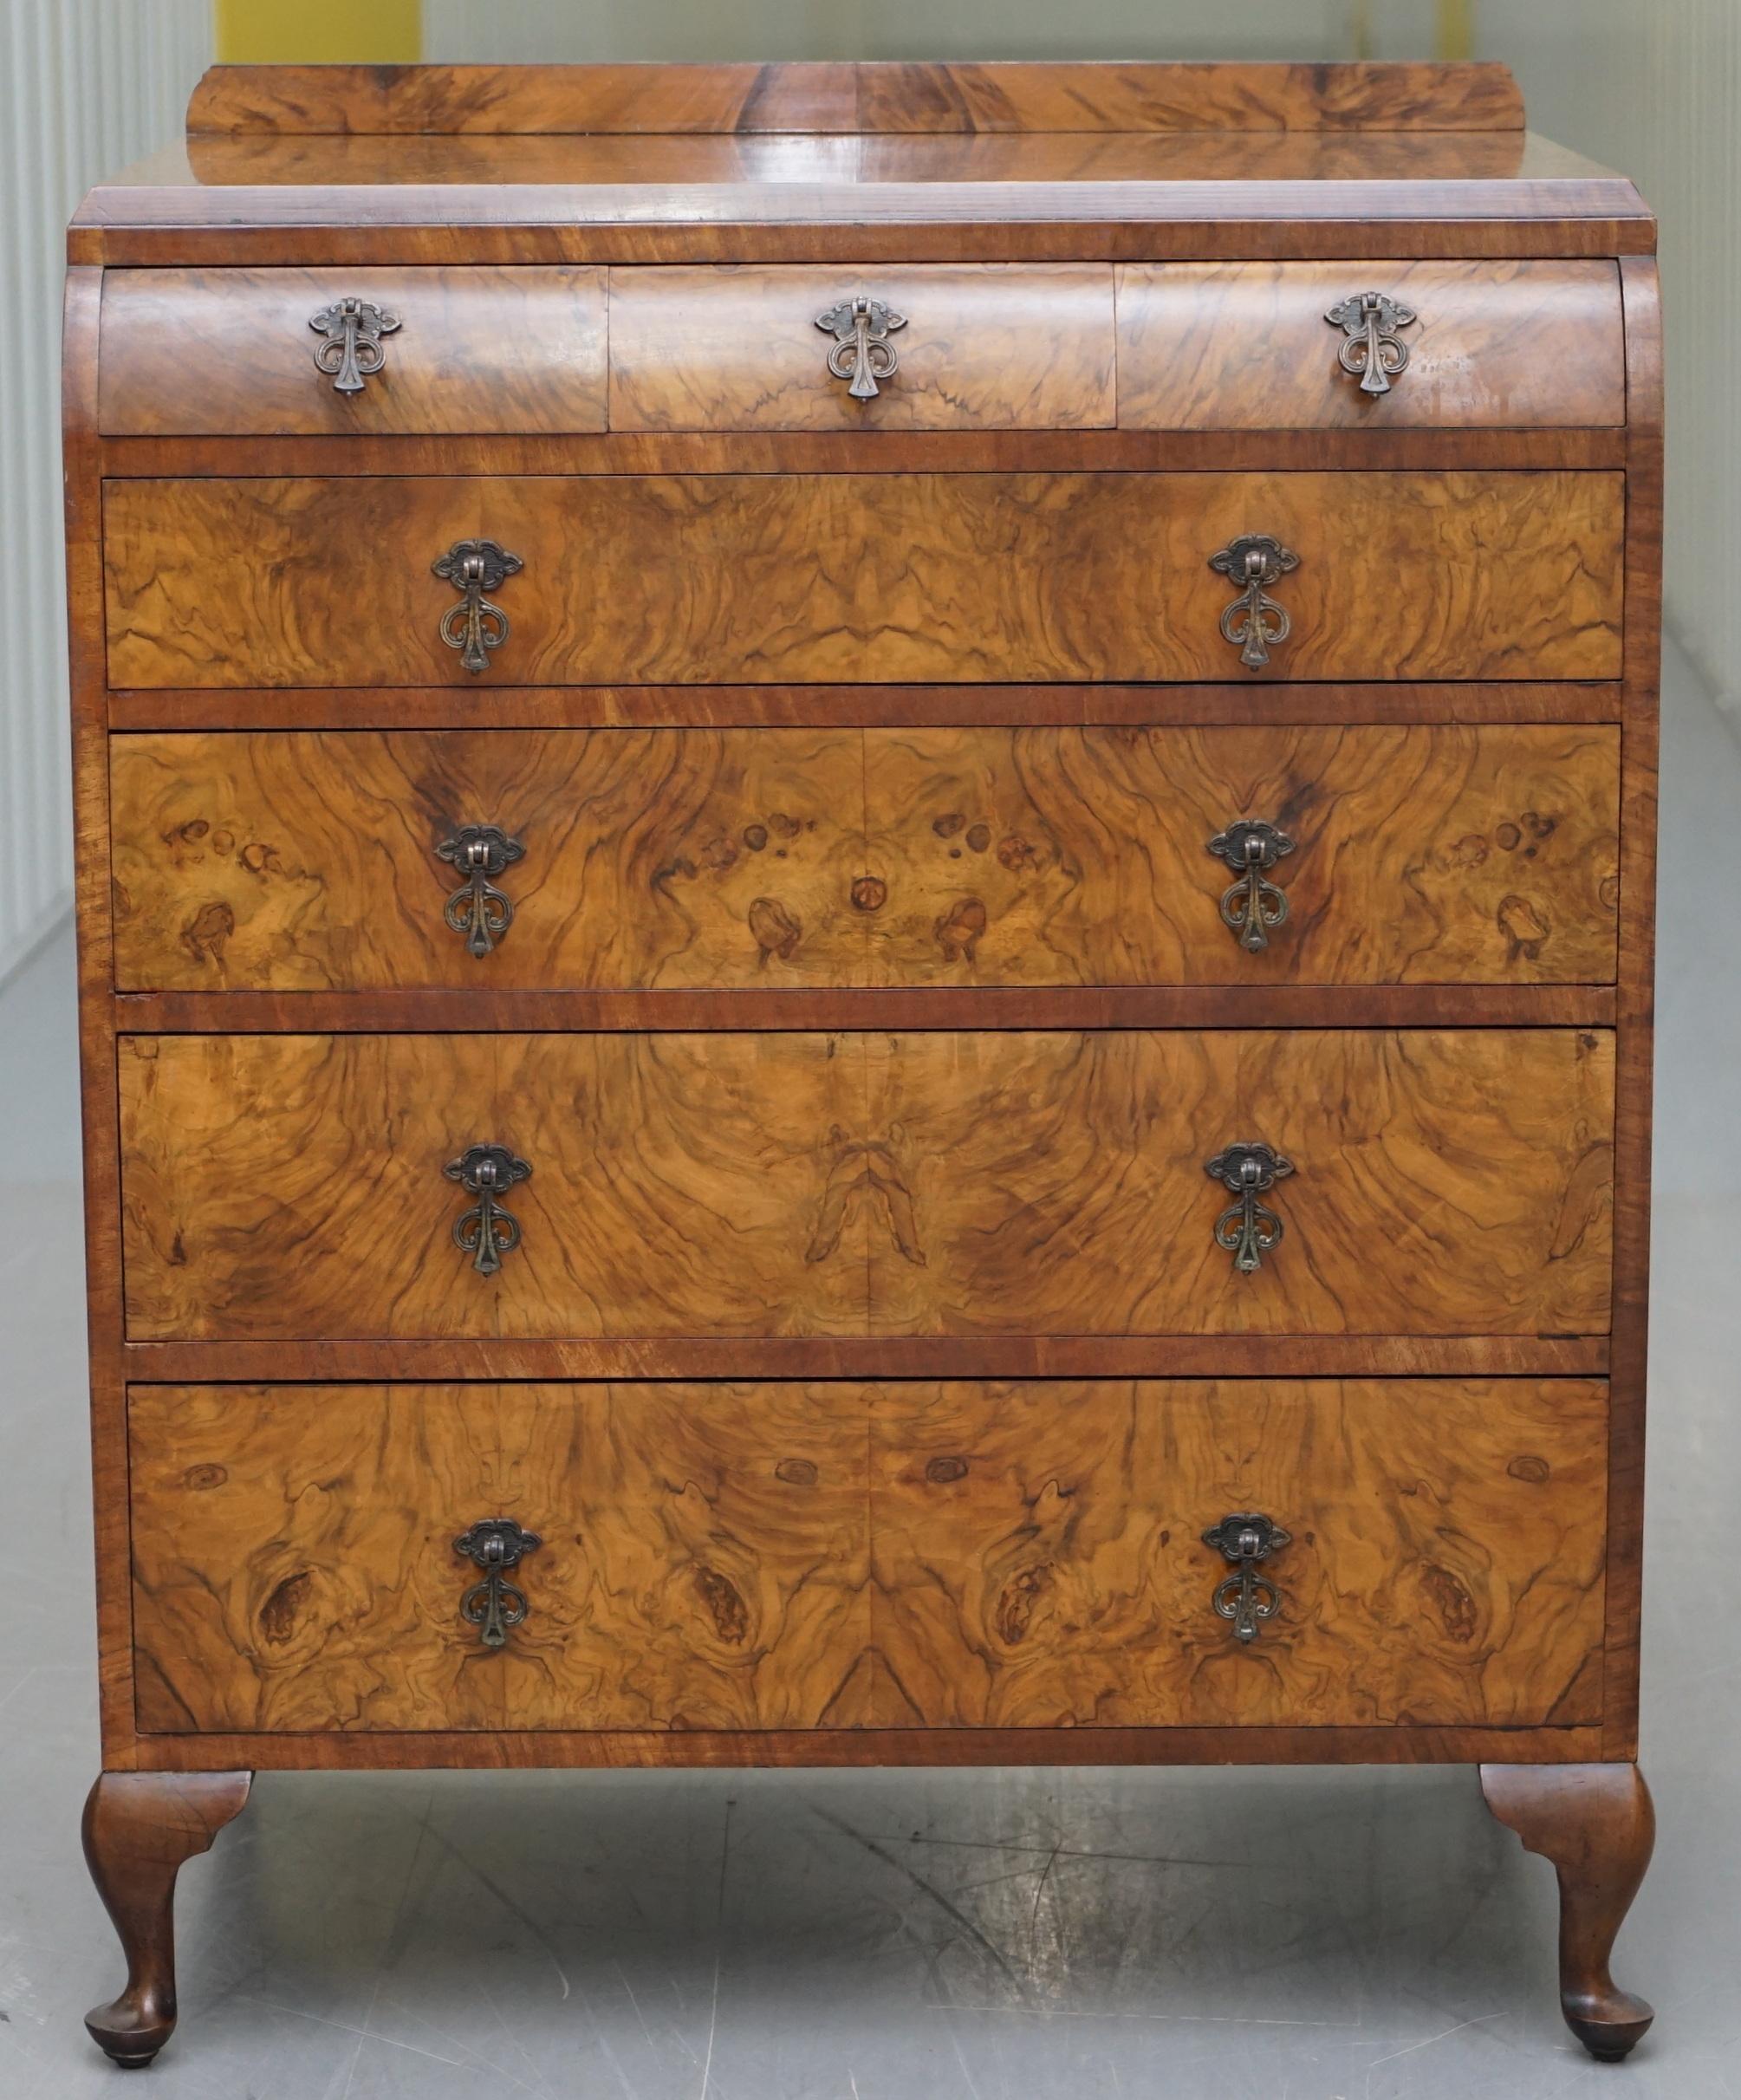 We are delighted to offer for sale this stunning original Art Deco quarter cut Walnut chest of drawers stamped Guaranteed hand made by British craftsman

These drawers are very decorative and sculptural, the timber patina is glorious, its quarter